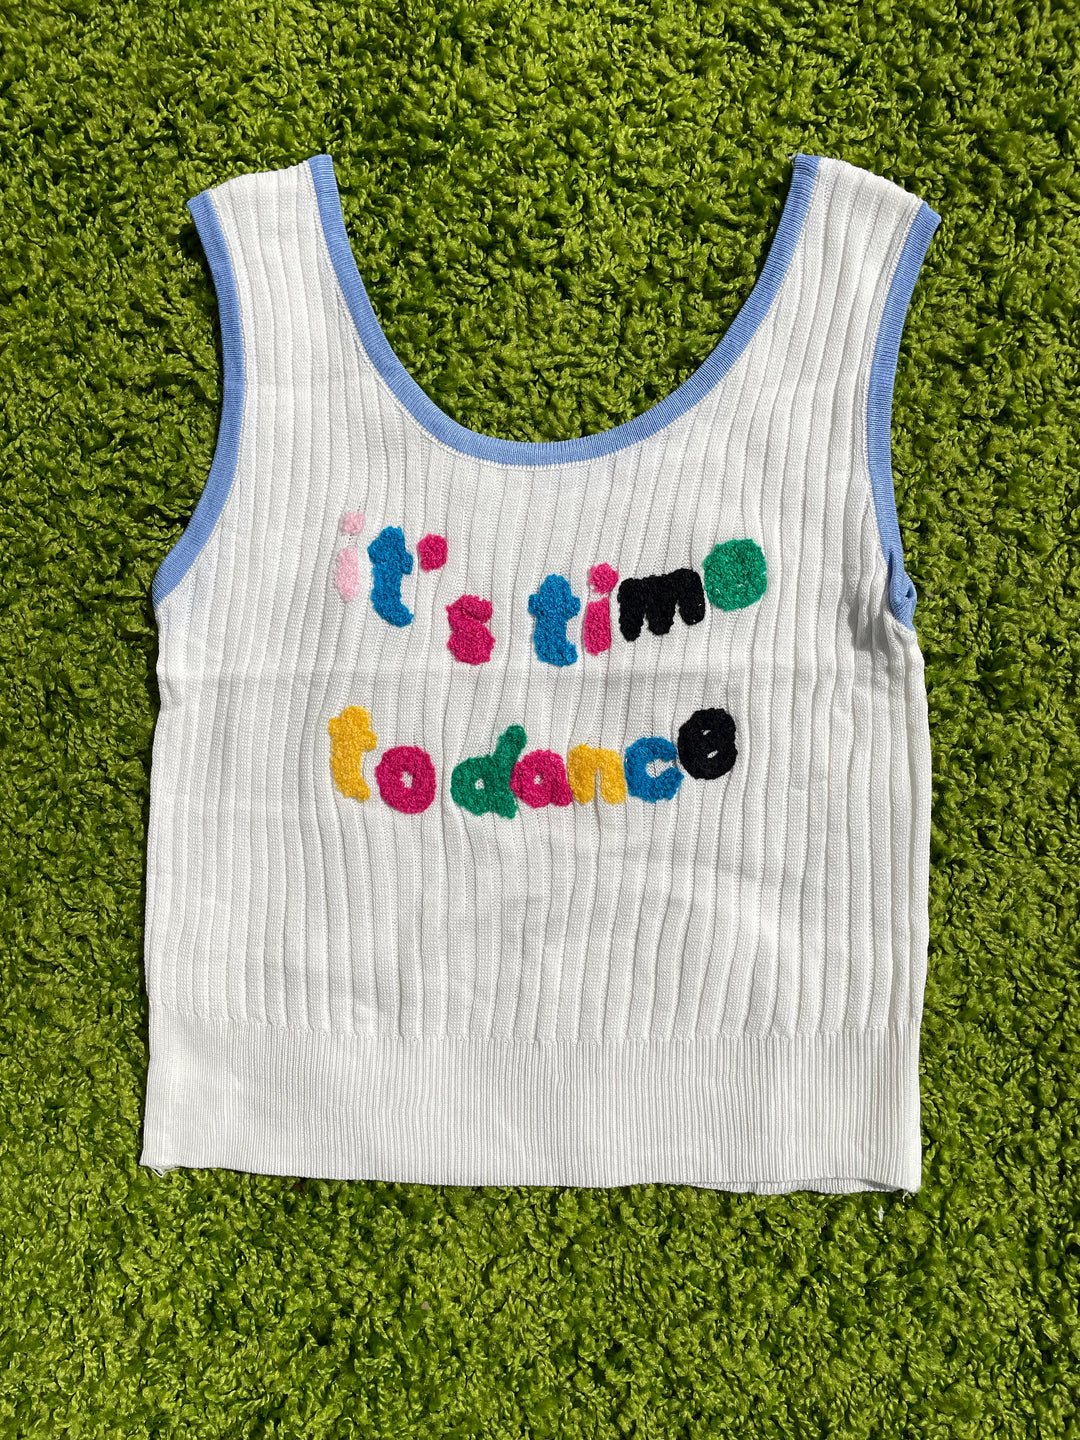 It's Time To Dance Tank Top